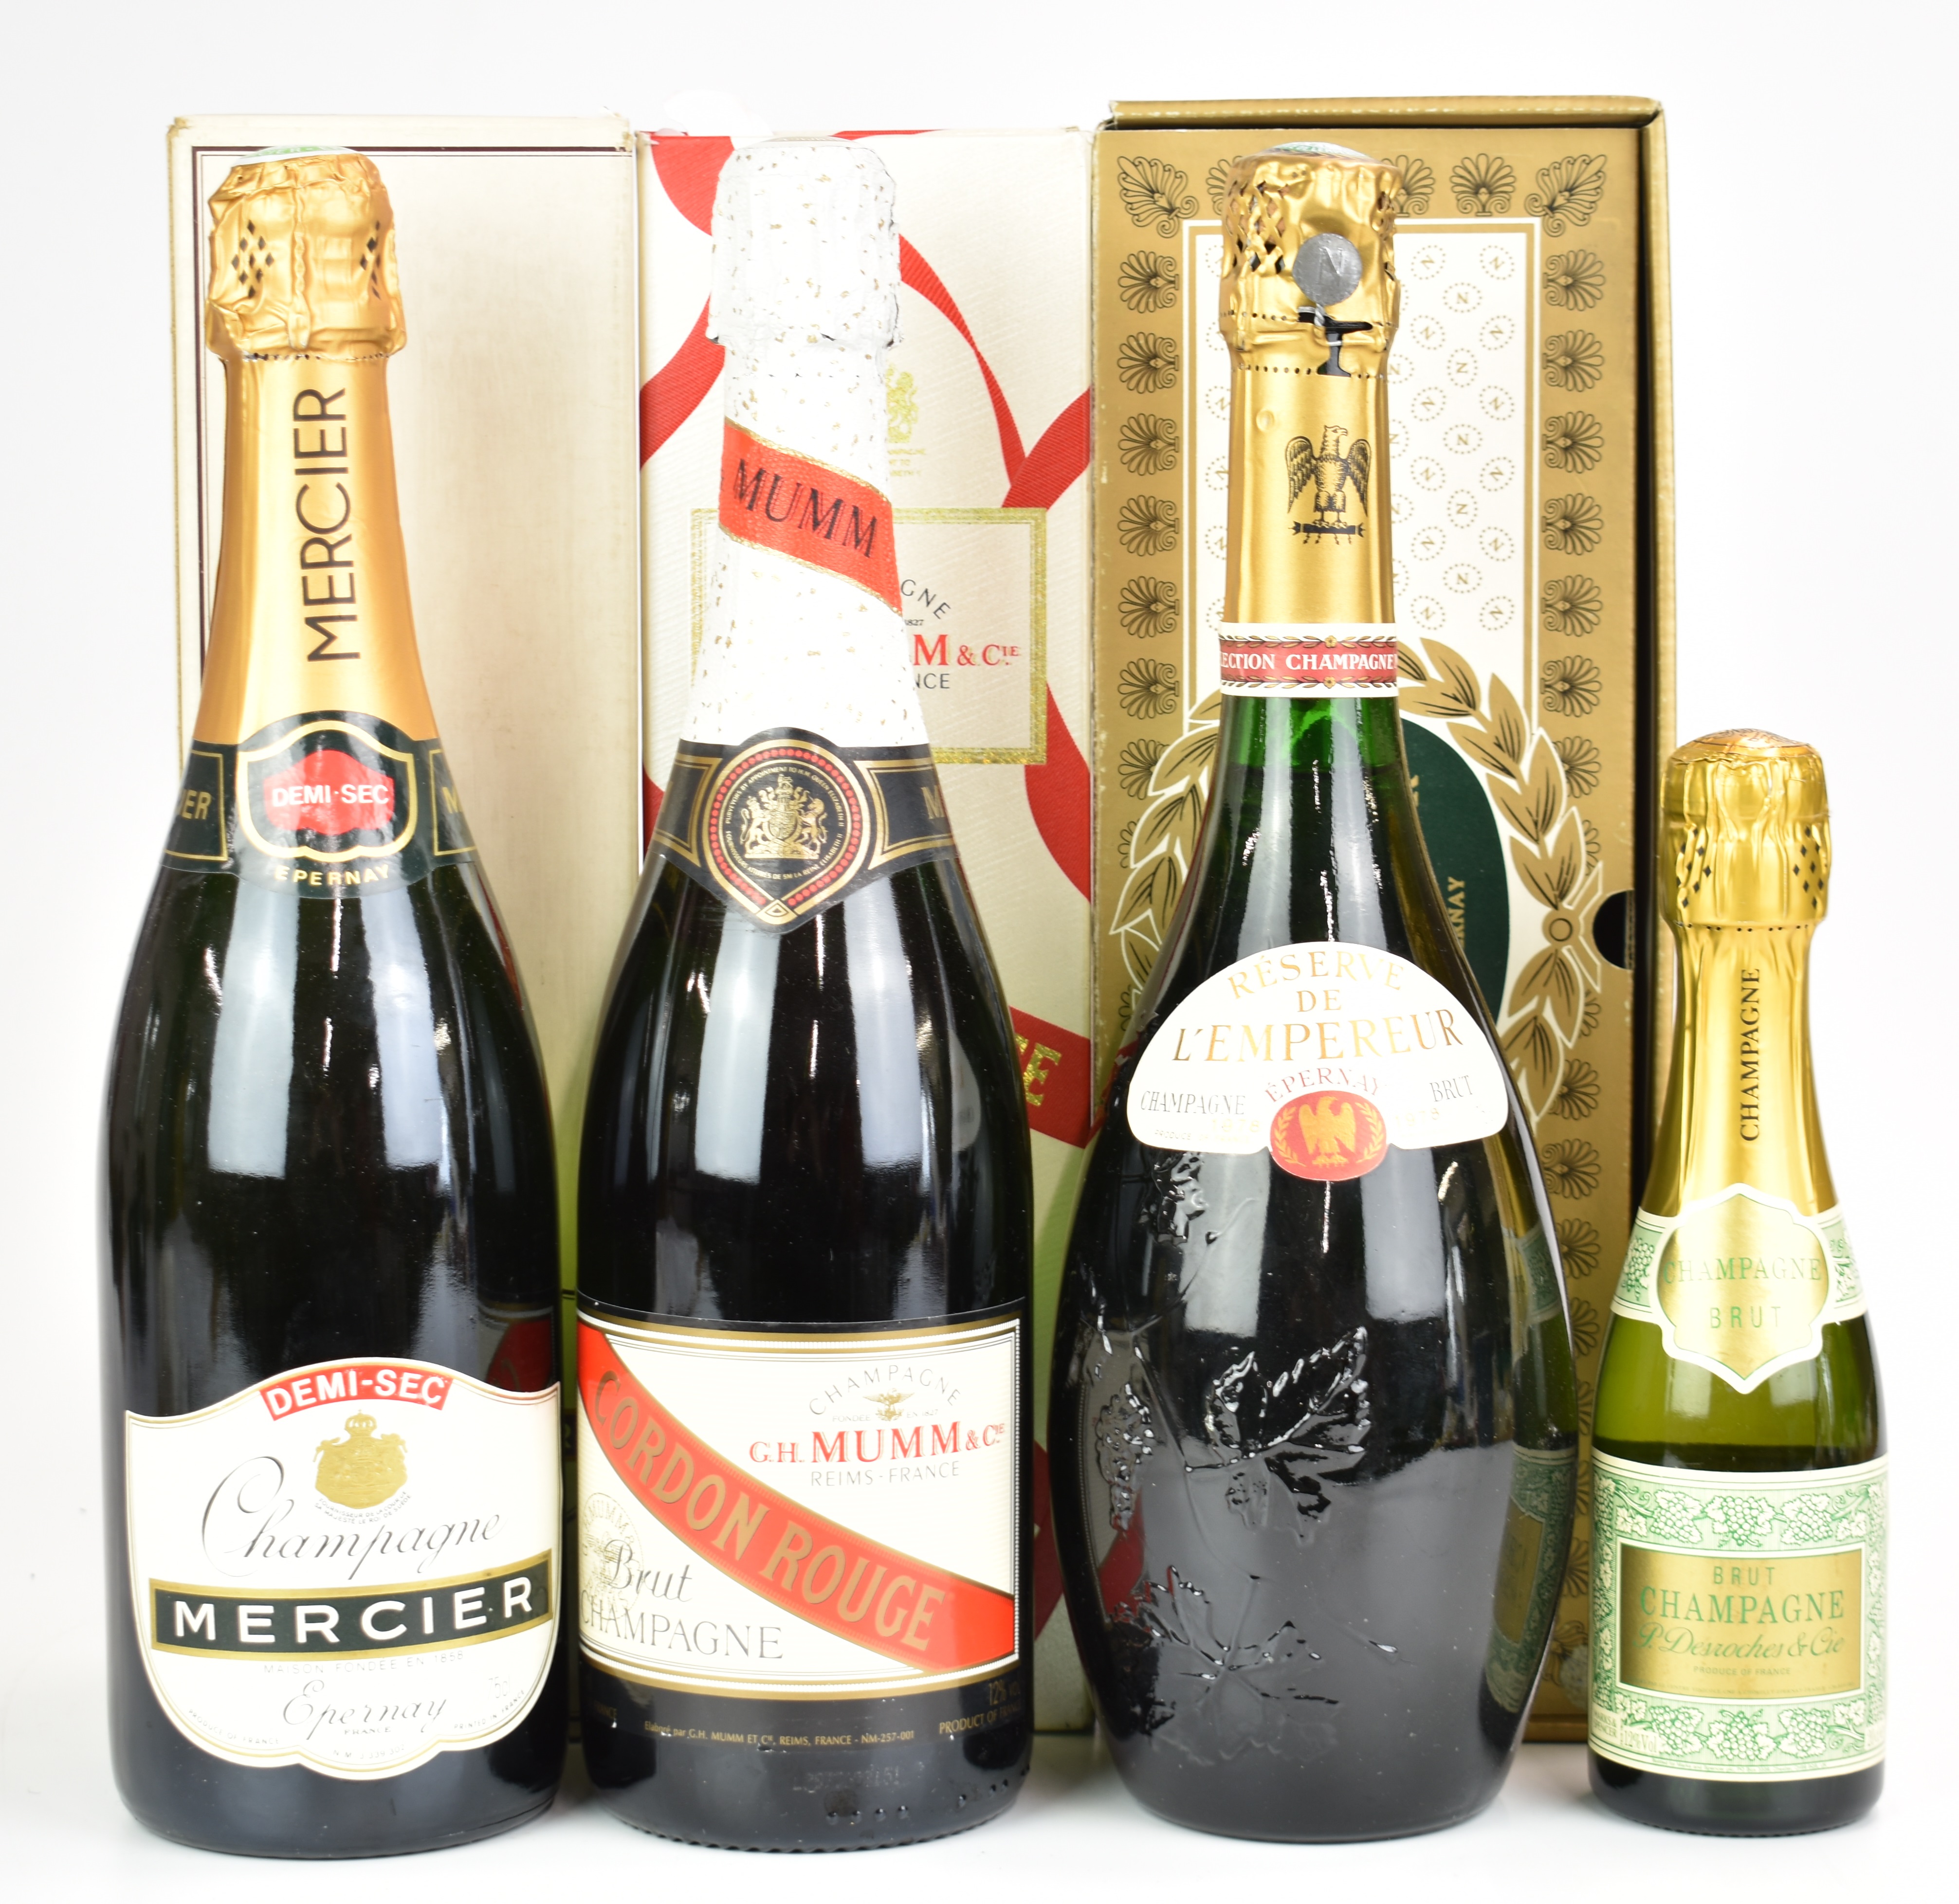 Four bottles of Champagne comprising Mumm, 75cl, 12%, Mercier 75cl and L'Empereur reserve, all boxed